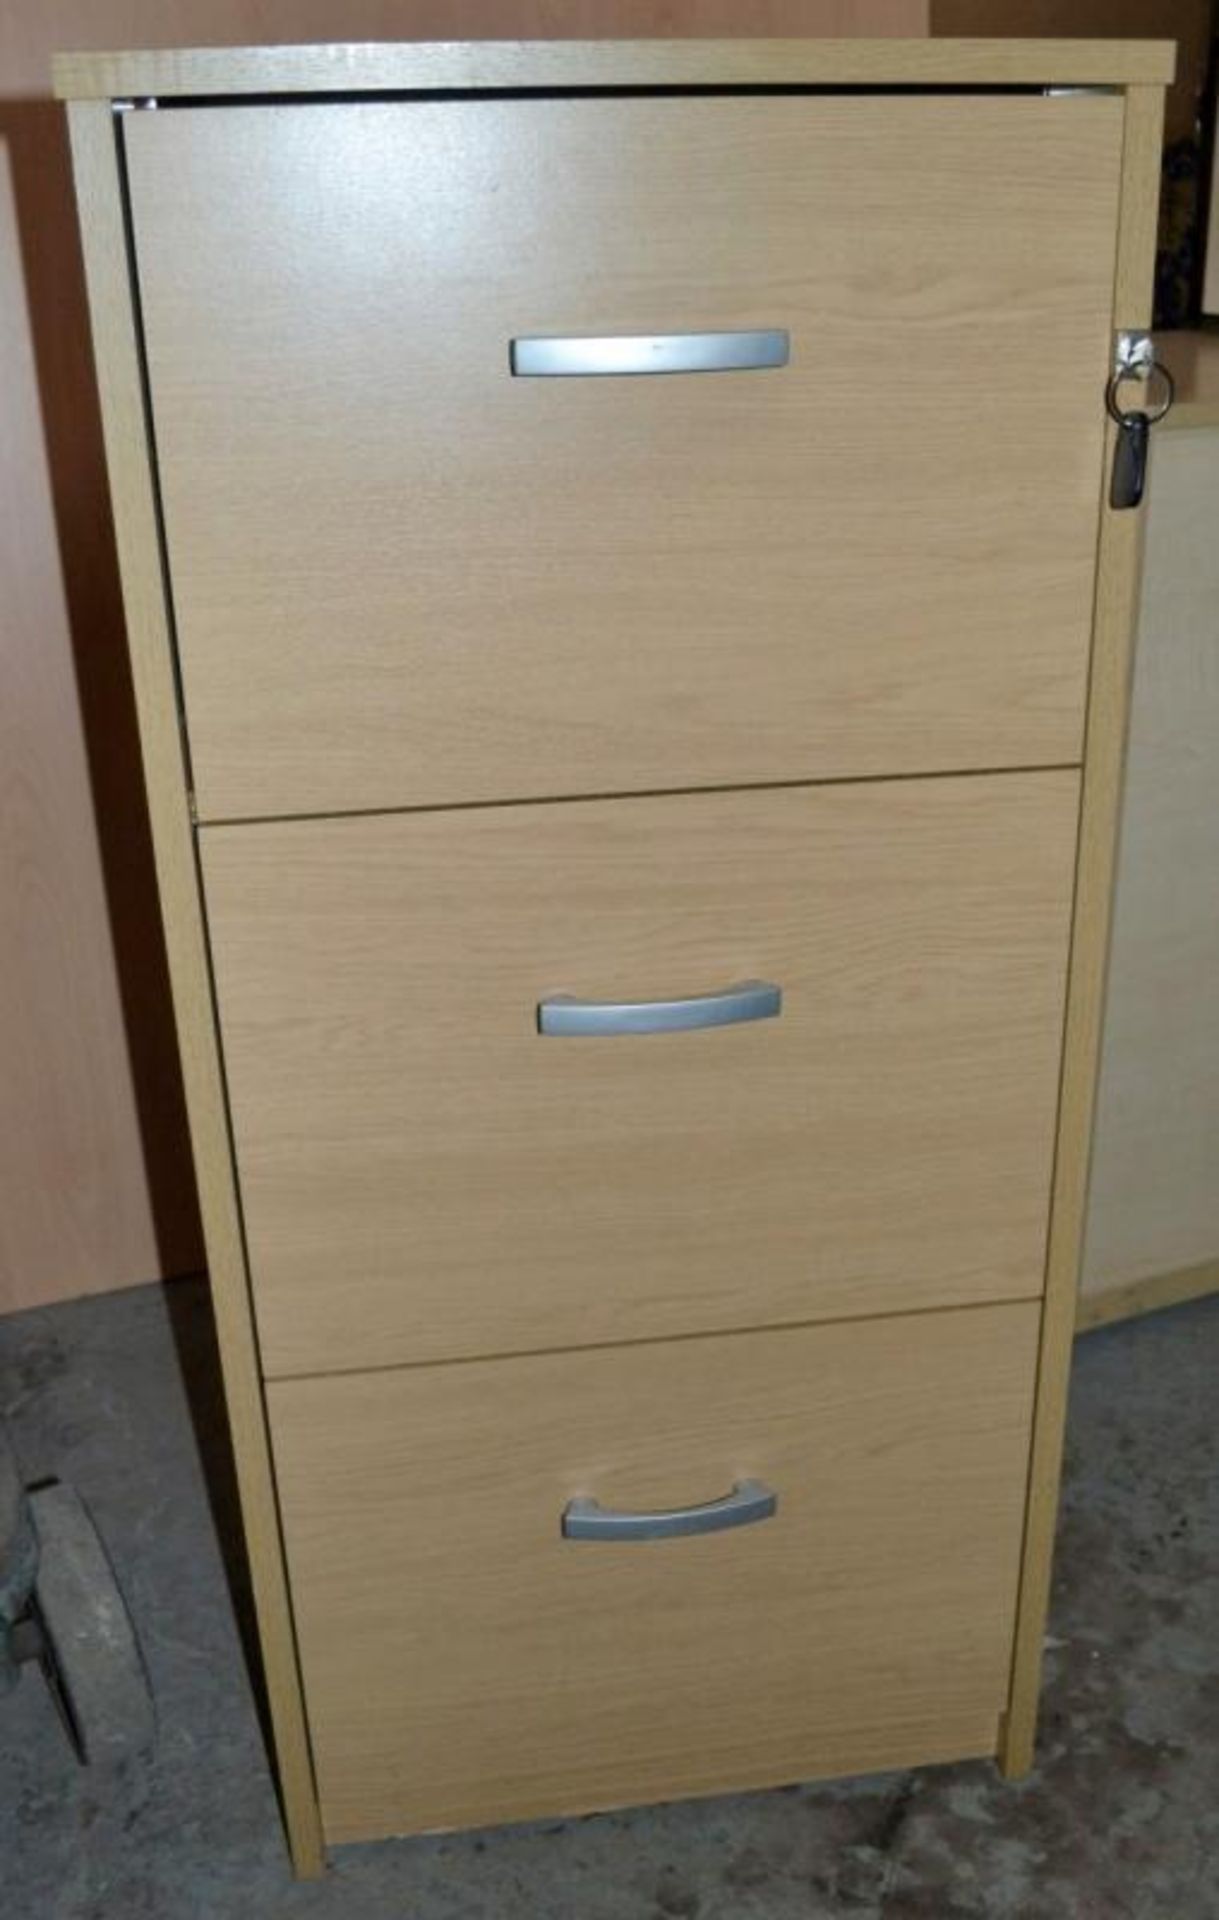 1 x 3-Door Lockable Filing Cabinet With Key - Dimensions: W48 x D60 x H102cm - Ref: MT939 - Very Goo - Image 5 of 5